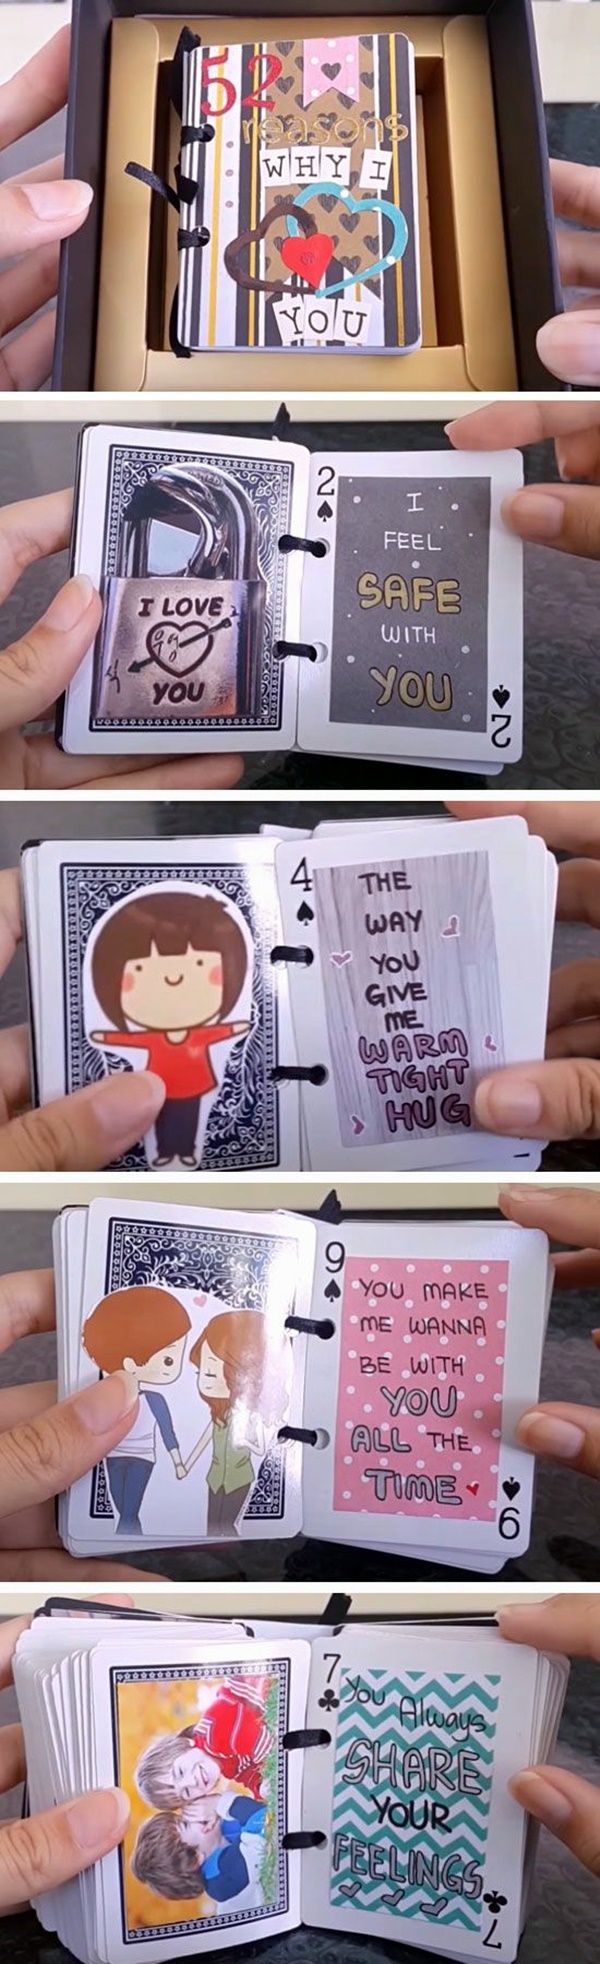 Now here is a Homemade Valentines Day Ideas for Him that could probably be used...